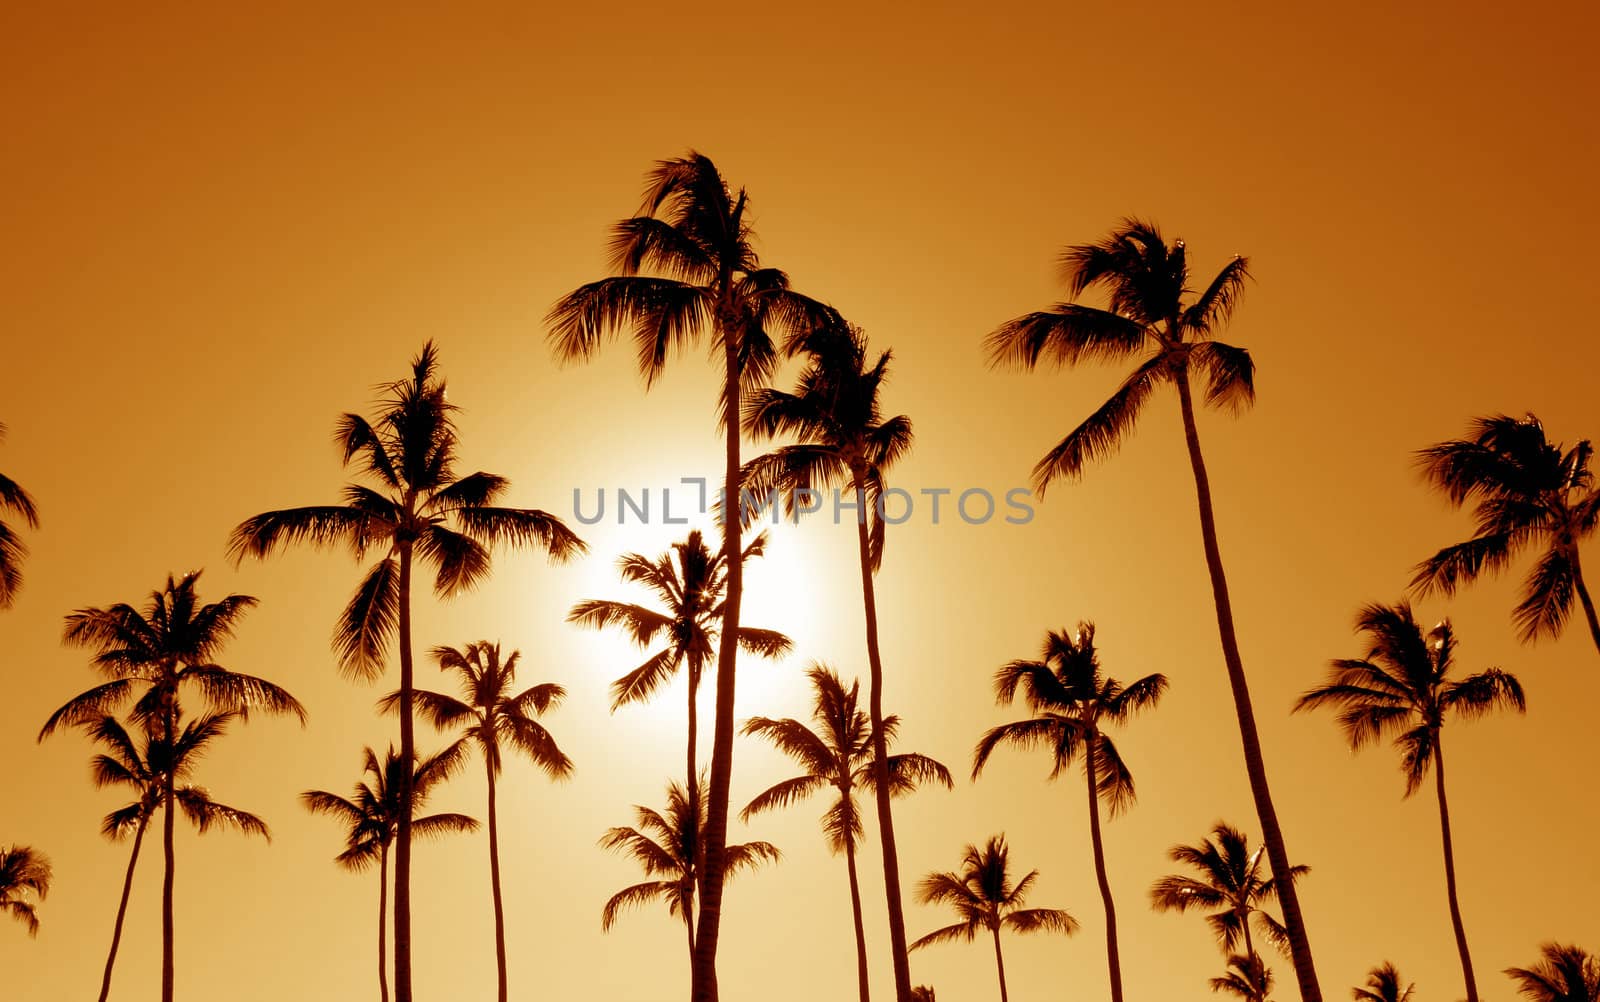 Orange Cast Palm Trees
 by ca2hill